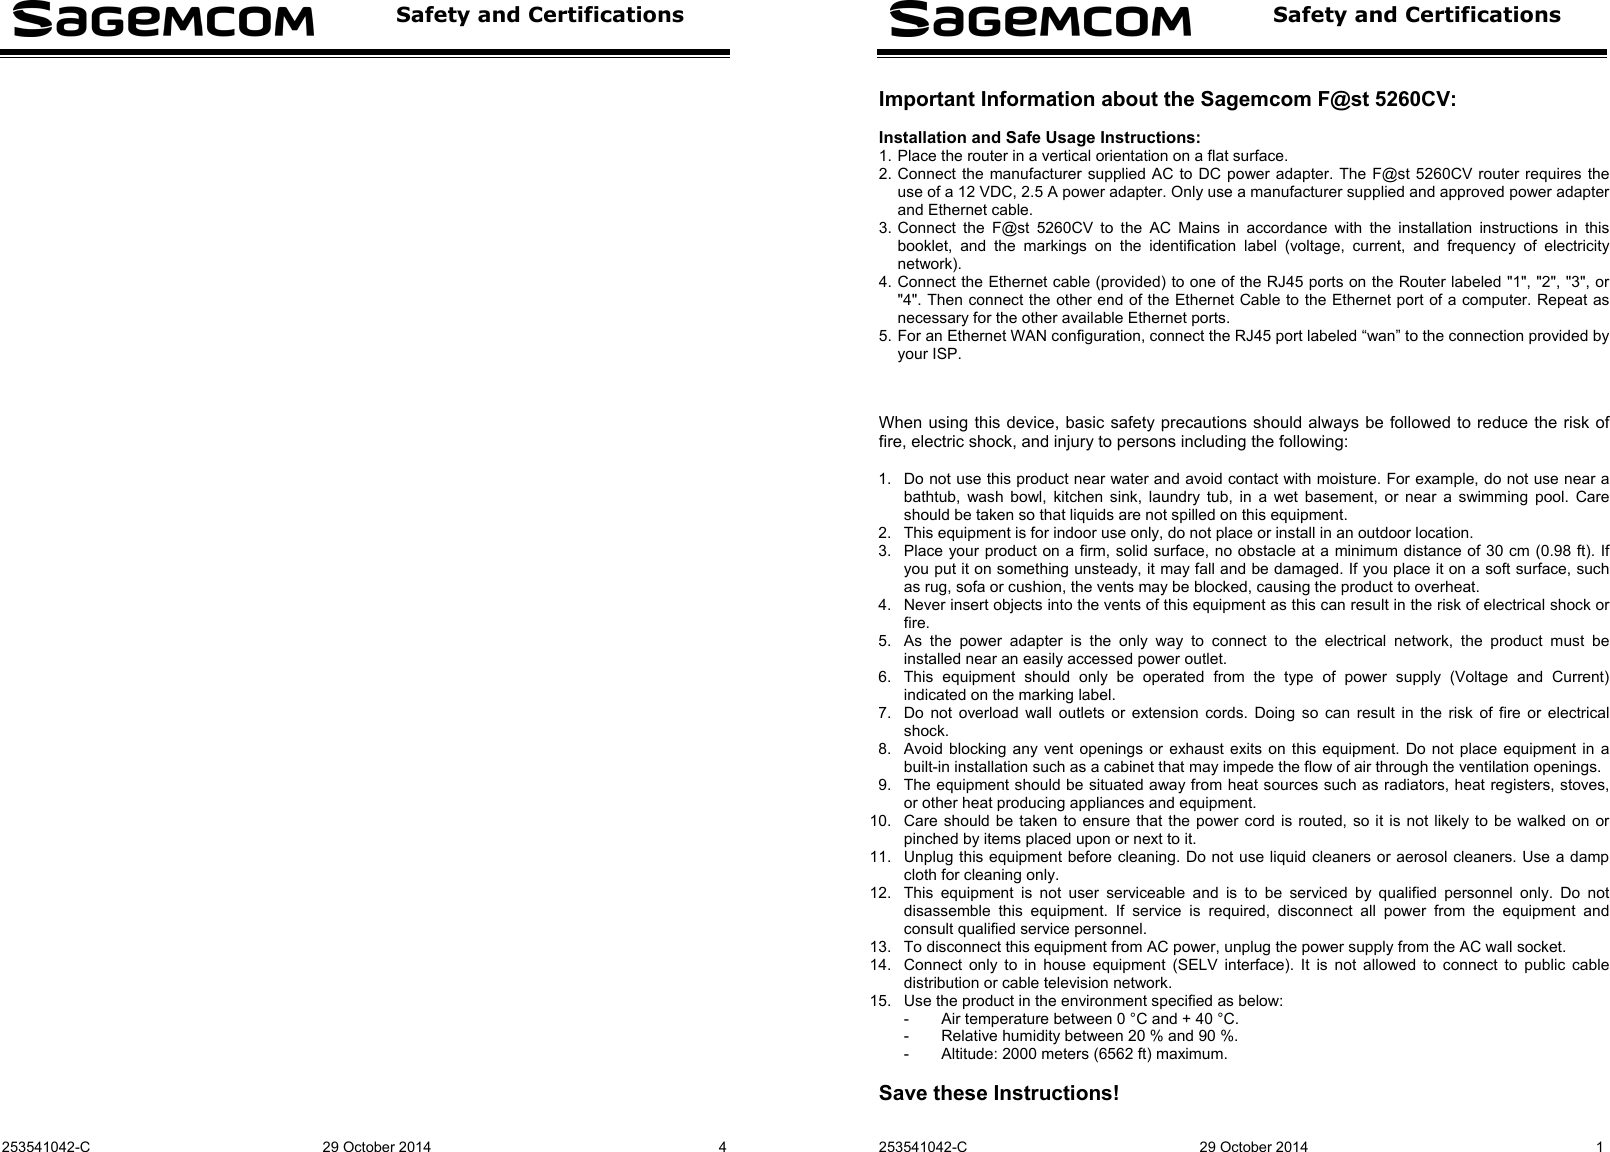  Safety and Certifications   253541042-C 29 October 2014  4    Safety and Certifications   253541042-C 29 October 2014  1 Important Information about the Sagemcom F@st 5260CV:  Installation and Safe Usage Instructions: 1. Place the router in a vertical orientation on a flat surface. 2. Connect the manufacturer supplied AC to DC power adapter. The F@st 5260CV router requires the use of a 12 VDC, 2.5 A power adapter. Only use a manufacturer supplied and approved power adapter and Ethernet cable. 3. Connect the F@st 5260CV to the AC Mains in accordance with the installation instructions in this booklet, and the markings on the identification label (voltage, current, and frequency of electricity network). 4. Connect the Ethernet cable (provided) to one of the RJ45 ports on the Router labeled &quot;1&quot;, &quot;2&quot;, &quot;3&quot;, or &quot;4&quot;. Then connect the other end of the Ethernet Cable to the Ethernet port of a computer. Repeat as necessary for the other available Ethernet ports. 5. For an Ethernet WAN configuration, connect the RJ45 port labeled “wan” to the connection provided by your ISP.    When using this device, basic safety precautions should always be followed to reduce the risk of fire, electric shock, and injury to persons including the following:  1.  Do not use this product near water and avoid contact with moisture. For example, do not use near a bathtub, wash bowl, kitchen sink, laundry tub, in a wet basement, or near a swimming pool. Care should be taken so that liquids are not spilled on this equipment. 2.  This equipment is for indoor use only, do not place or install in an outdoor location. 3.  Place your product on a firm, solid surface, no obstacle at a minimum distance of 30 cm (0.98 ft). If you put it on something unsteady, it may fall and be damaged. If you place it on a soft surface, such as rug, sofa or cushion, the vents may be blocked, causing the product to overheat. 4.  Never insert objects into the vents of this equipment as this can result in the risk of electrical shock or fire. 5.  As the power adapter is the only way to connect to the electrical network, the product must be installed near an easily accessed power outlet. 6.  This equipment should only be operated from the type of power supply (Voltage and Current) indicated on the marking label. 7.  Do not overload wall outlets or extension cords. Doing so can result in the risk of fire or electrical shock. 8.  Avoid blocking any vent openings or exhaust exits on this equipment. Do not place equipment in a built-in installation such as a cabinet that may impede the flow of air through the ventilation openings. 9.  The equipment should be situated away from heat sources such as radiators, heat registers, stoves, or other heat producing appliances and equipment. 10.  Care should be taken to ensure that the power cord is routed, so it is not likely to be walked on or pinched by items placed upon or next to it. 11.  Unplug this equipment before cleaning. Do not use liquid cleaners or aerosol cleaners. Use a damp cloth for cleaning only. 12.  This equipment is not user serviceable and is to be serviced by qualified personnel only. Do not disassemble this equipment. If service is required, disconnect all power from the equipment and consult qualified service personnel. 13.  To disconnect this equipment from AC power, unplug the power supply from the AC wall socket. 14.  Connect only to in house equipment (SELV interface). It is not allowed to connect to public cable distribution or cable television network. 15.  Use the product in the environment specified as below: -  Air temperature between 0 °C and + 40 °C. -  Relative humidity between 20 % and 90 %. -  Altitude: 2000 meters (6562 ft) maximum.  Save these Instructions! 